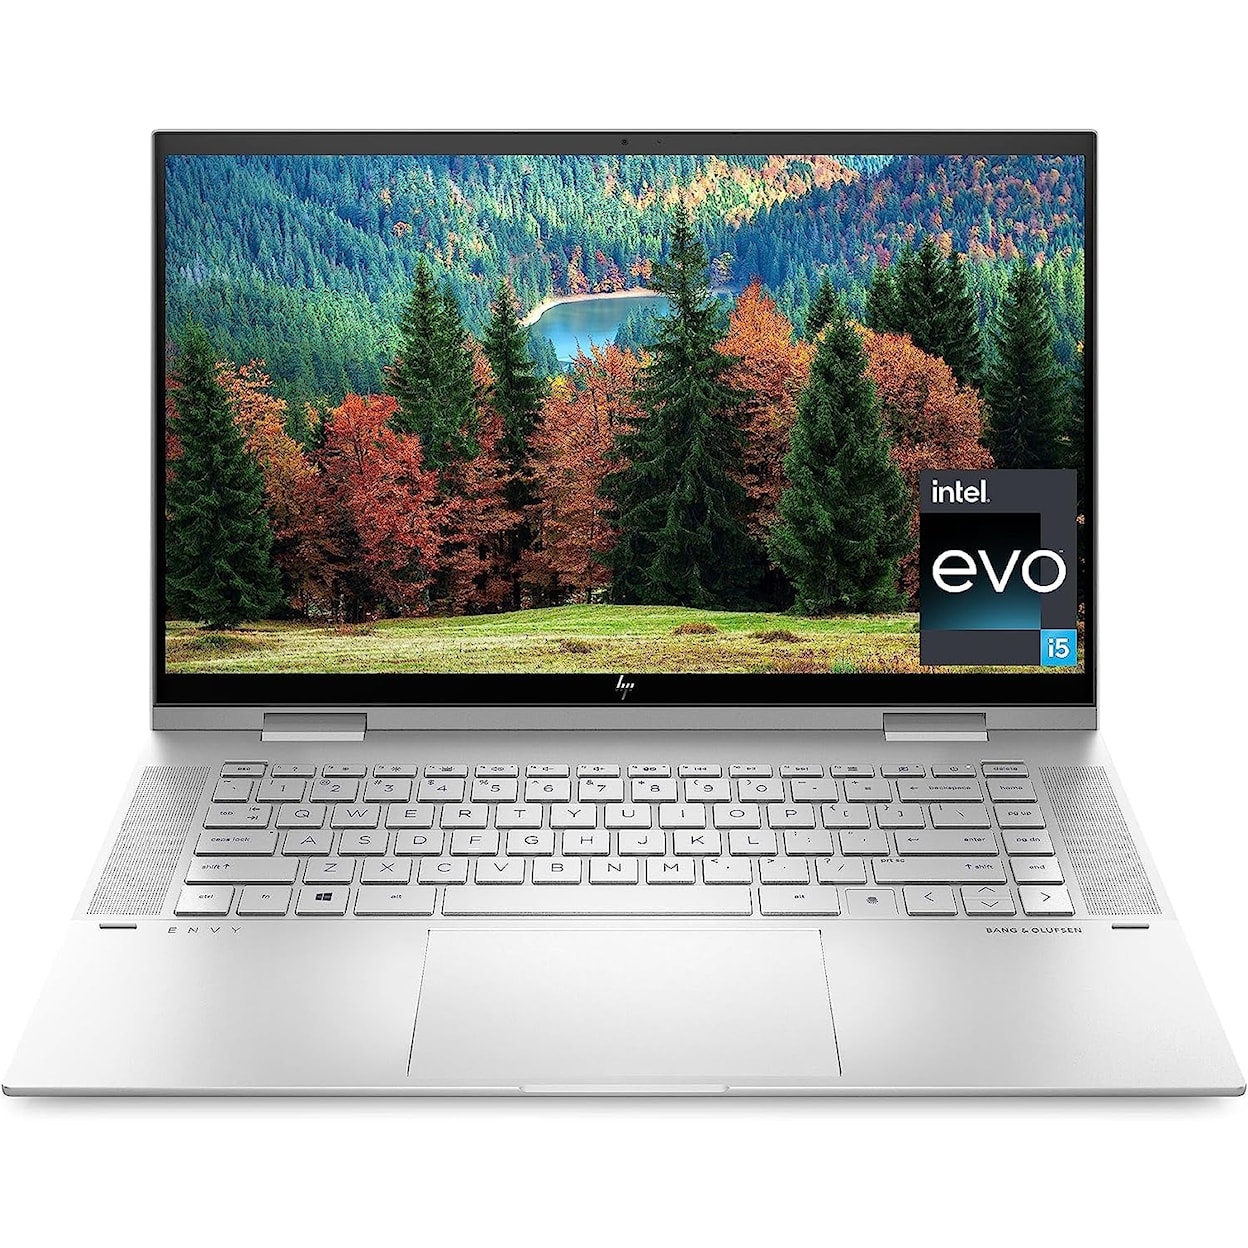 Sam's Furniture Electronics HP 15.6" Envy x360 Touch Laptop